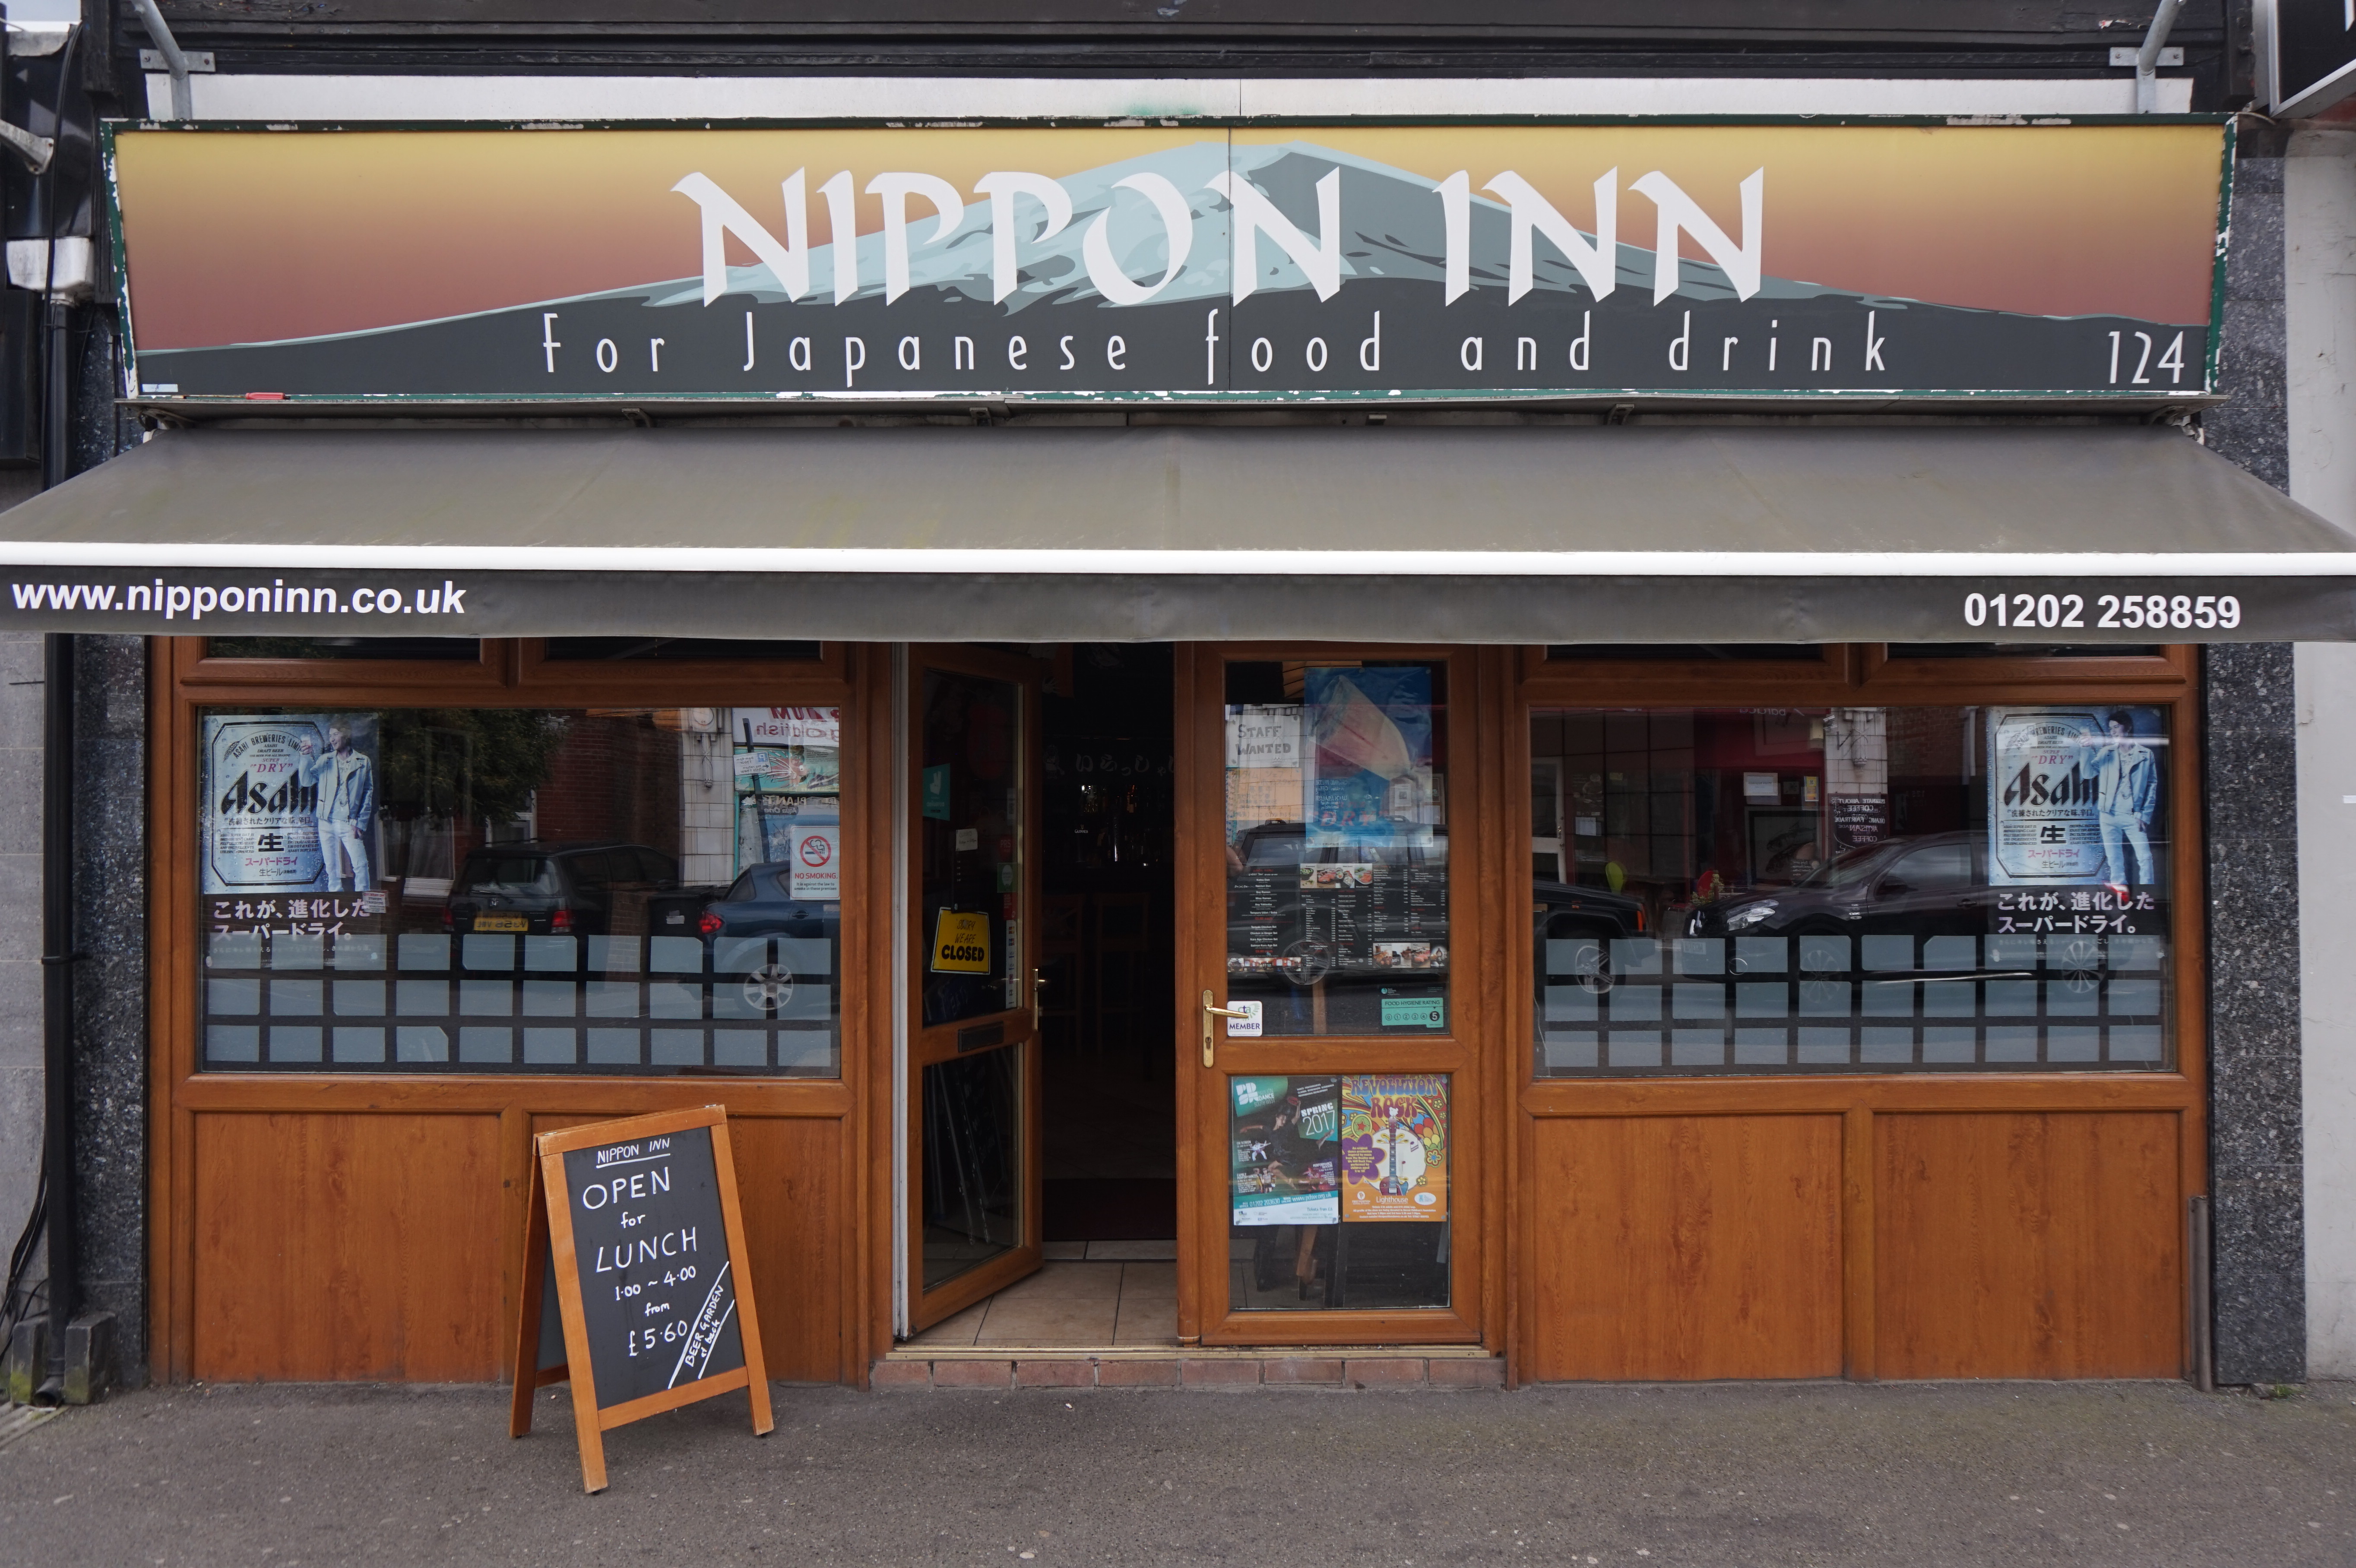 Nippon Inn Japanese Food Catering Franchise Outlet